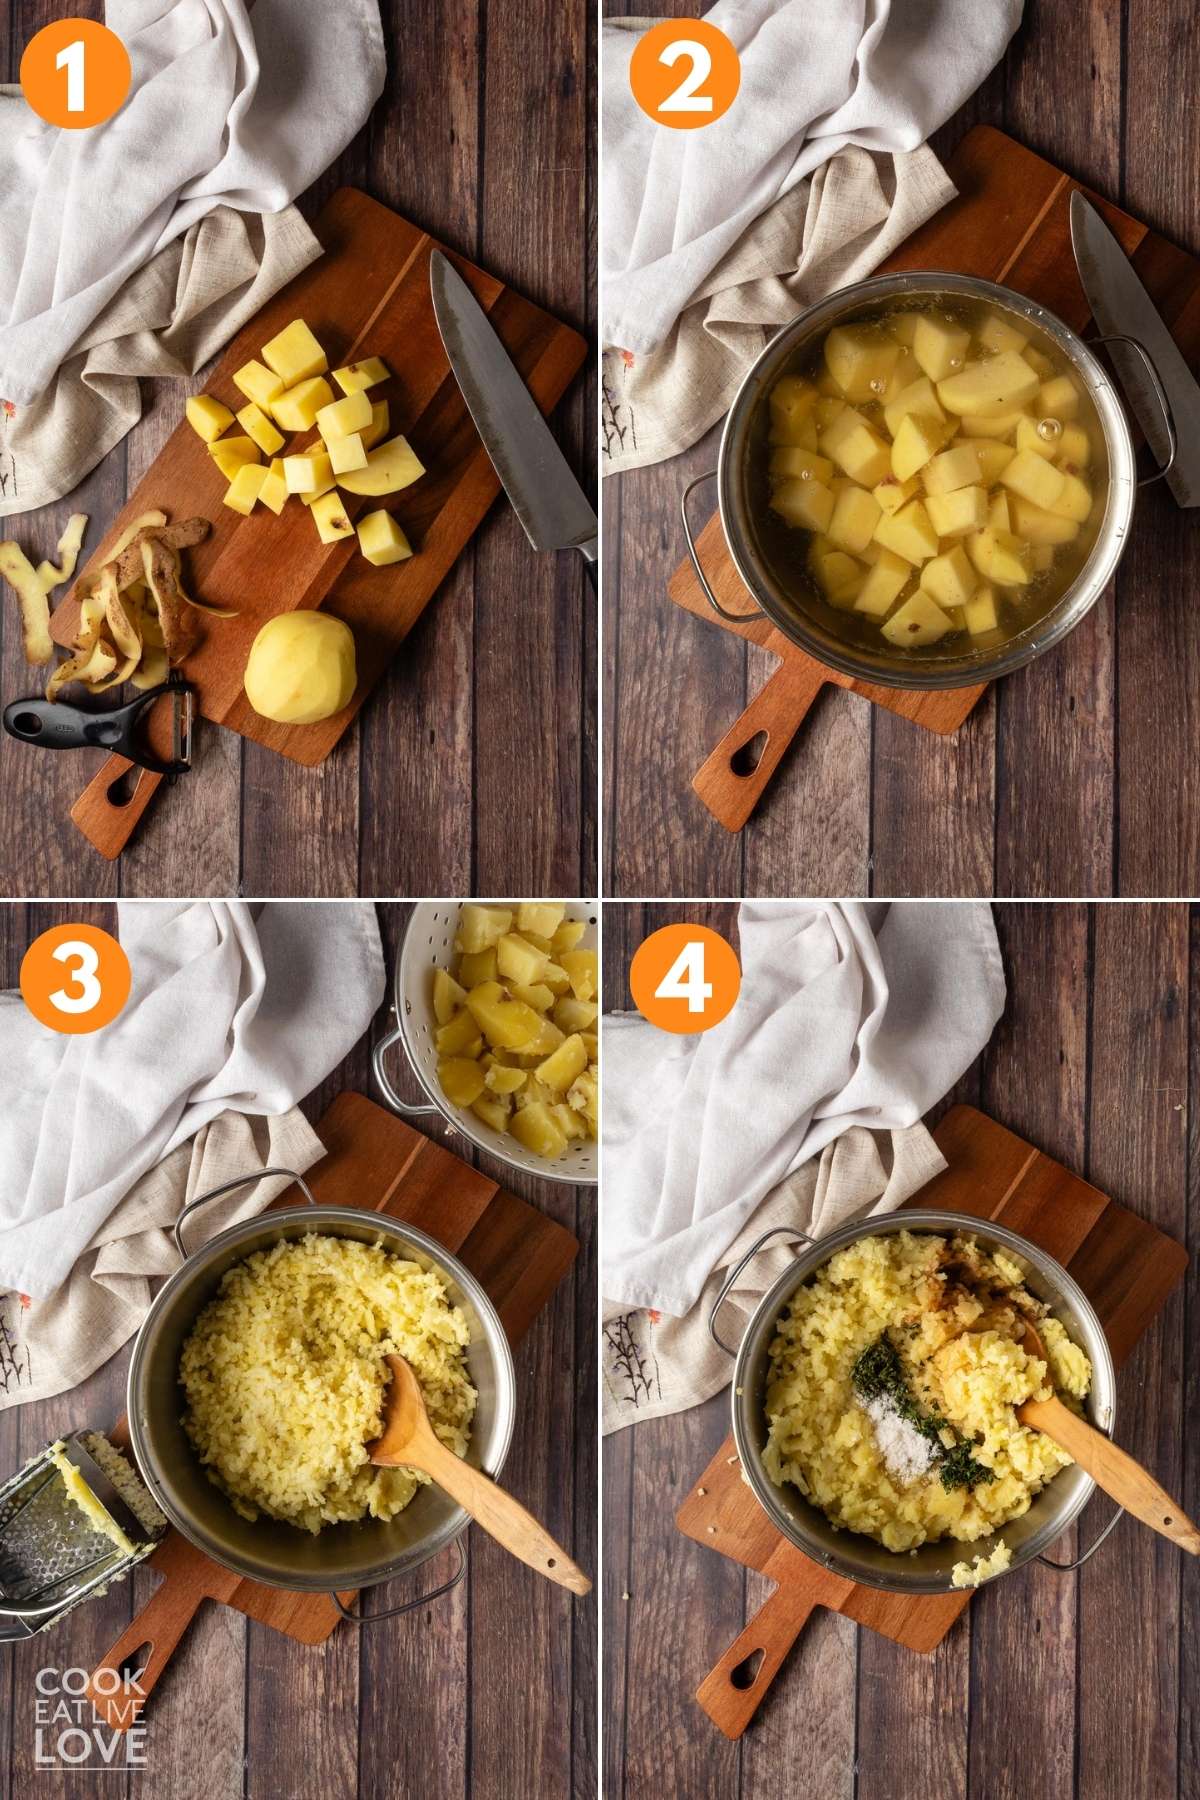 A collage of images showing how to prepare the mashed potatoes. 